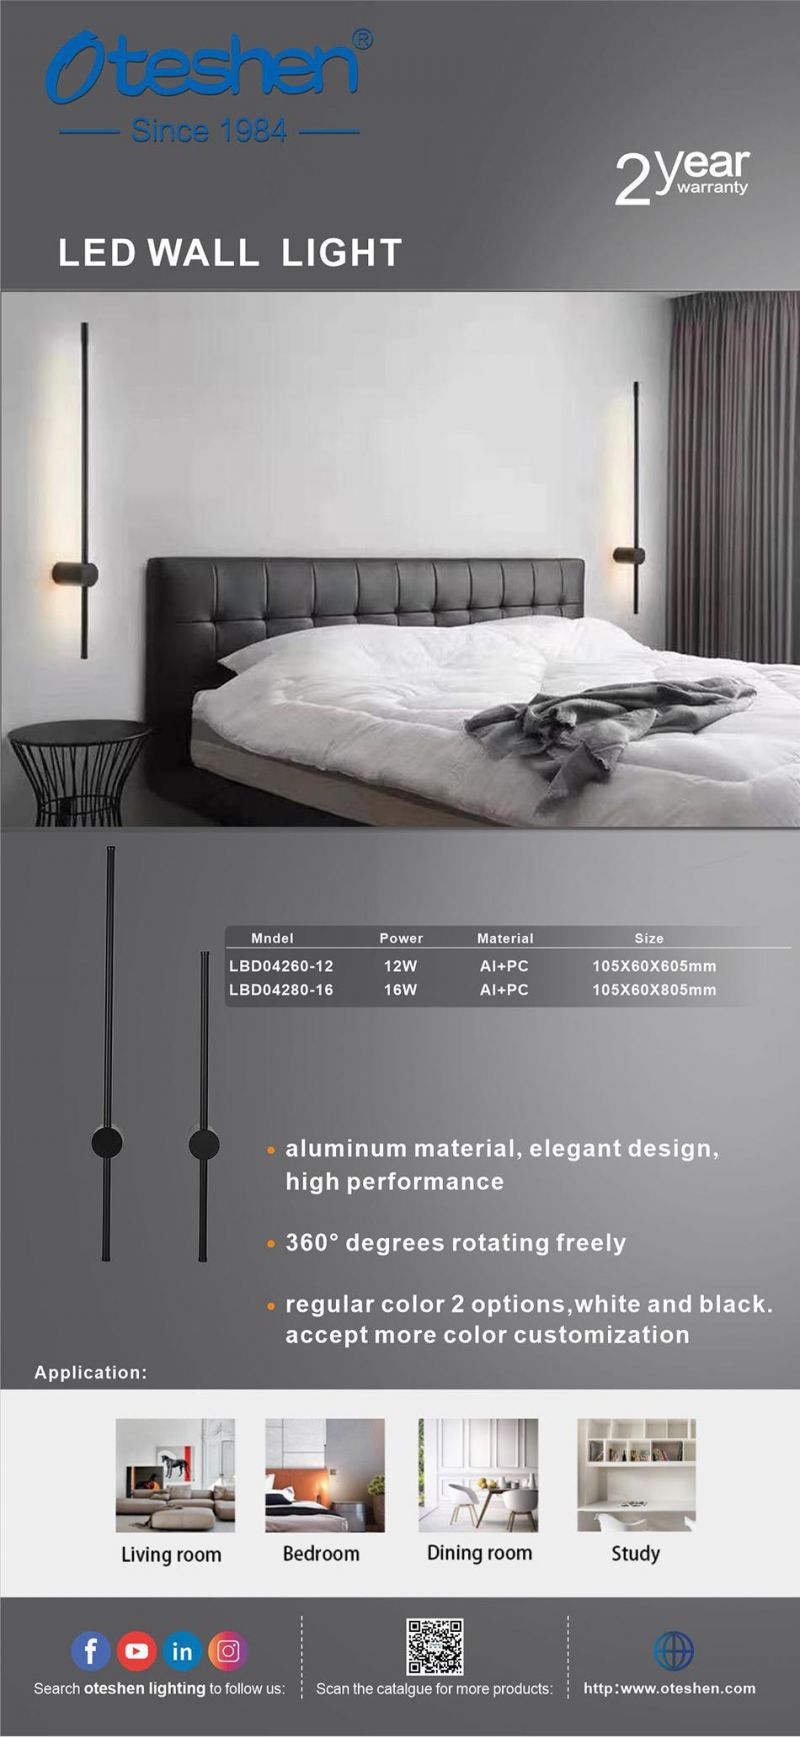 Stylish LED Wall Lamp Long Simple Nordic Living Room Sofa Background Wall Light Bedroom Bedside Decorative Lamp